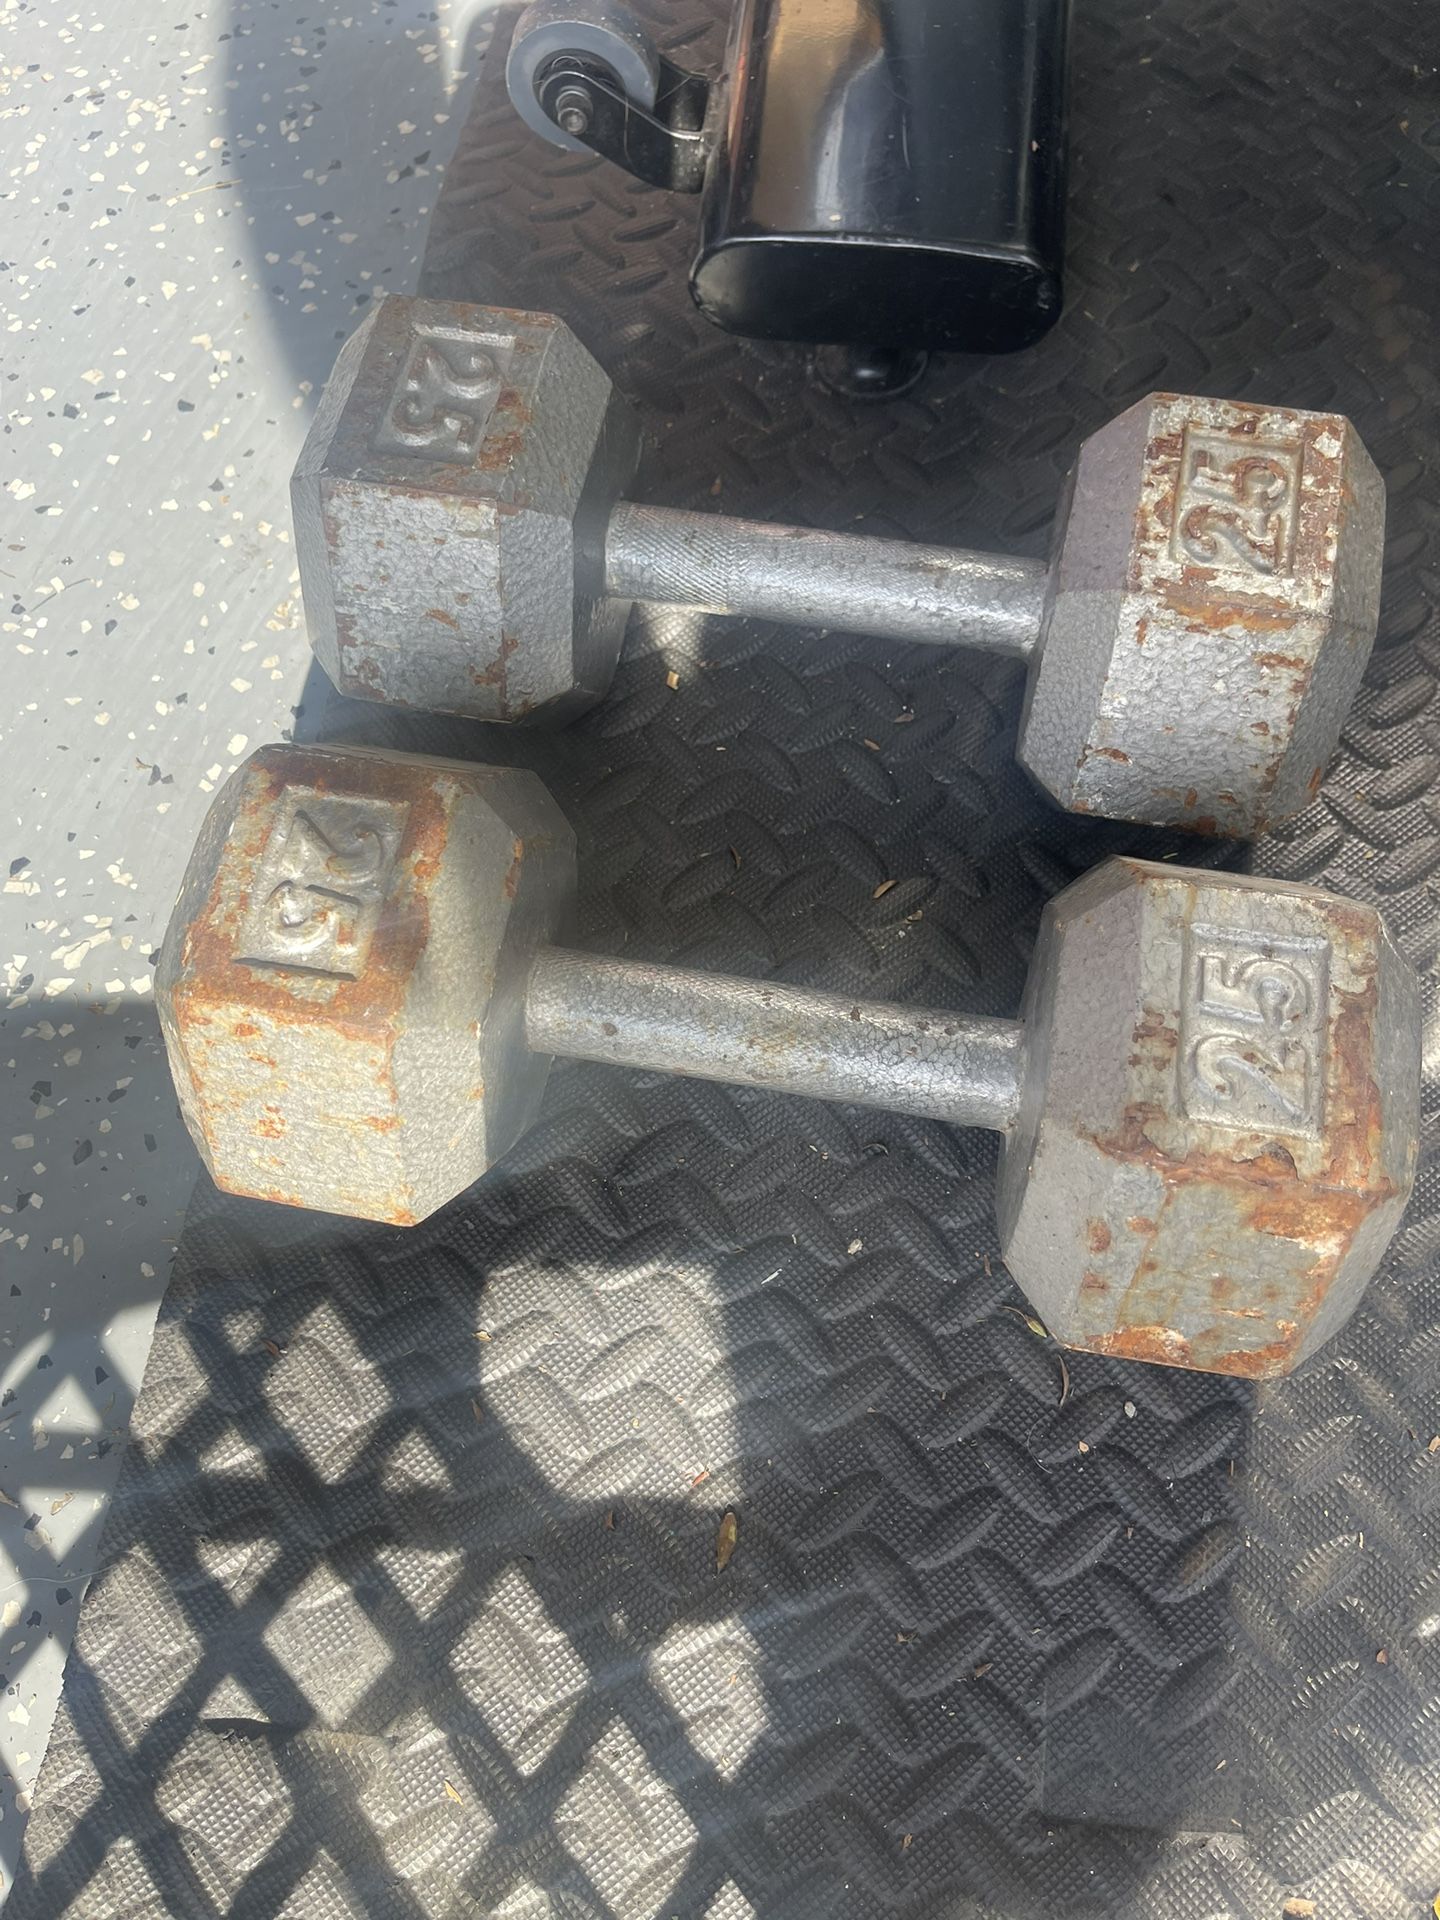 25lb Dumbbell Weights 